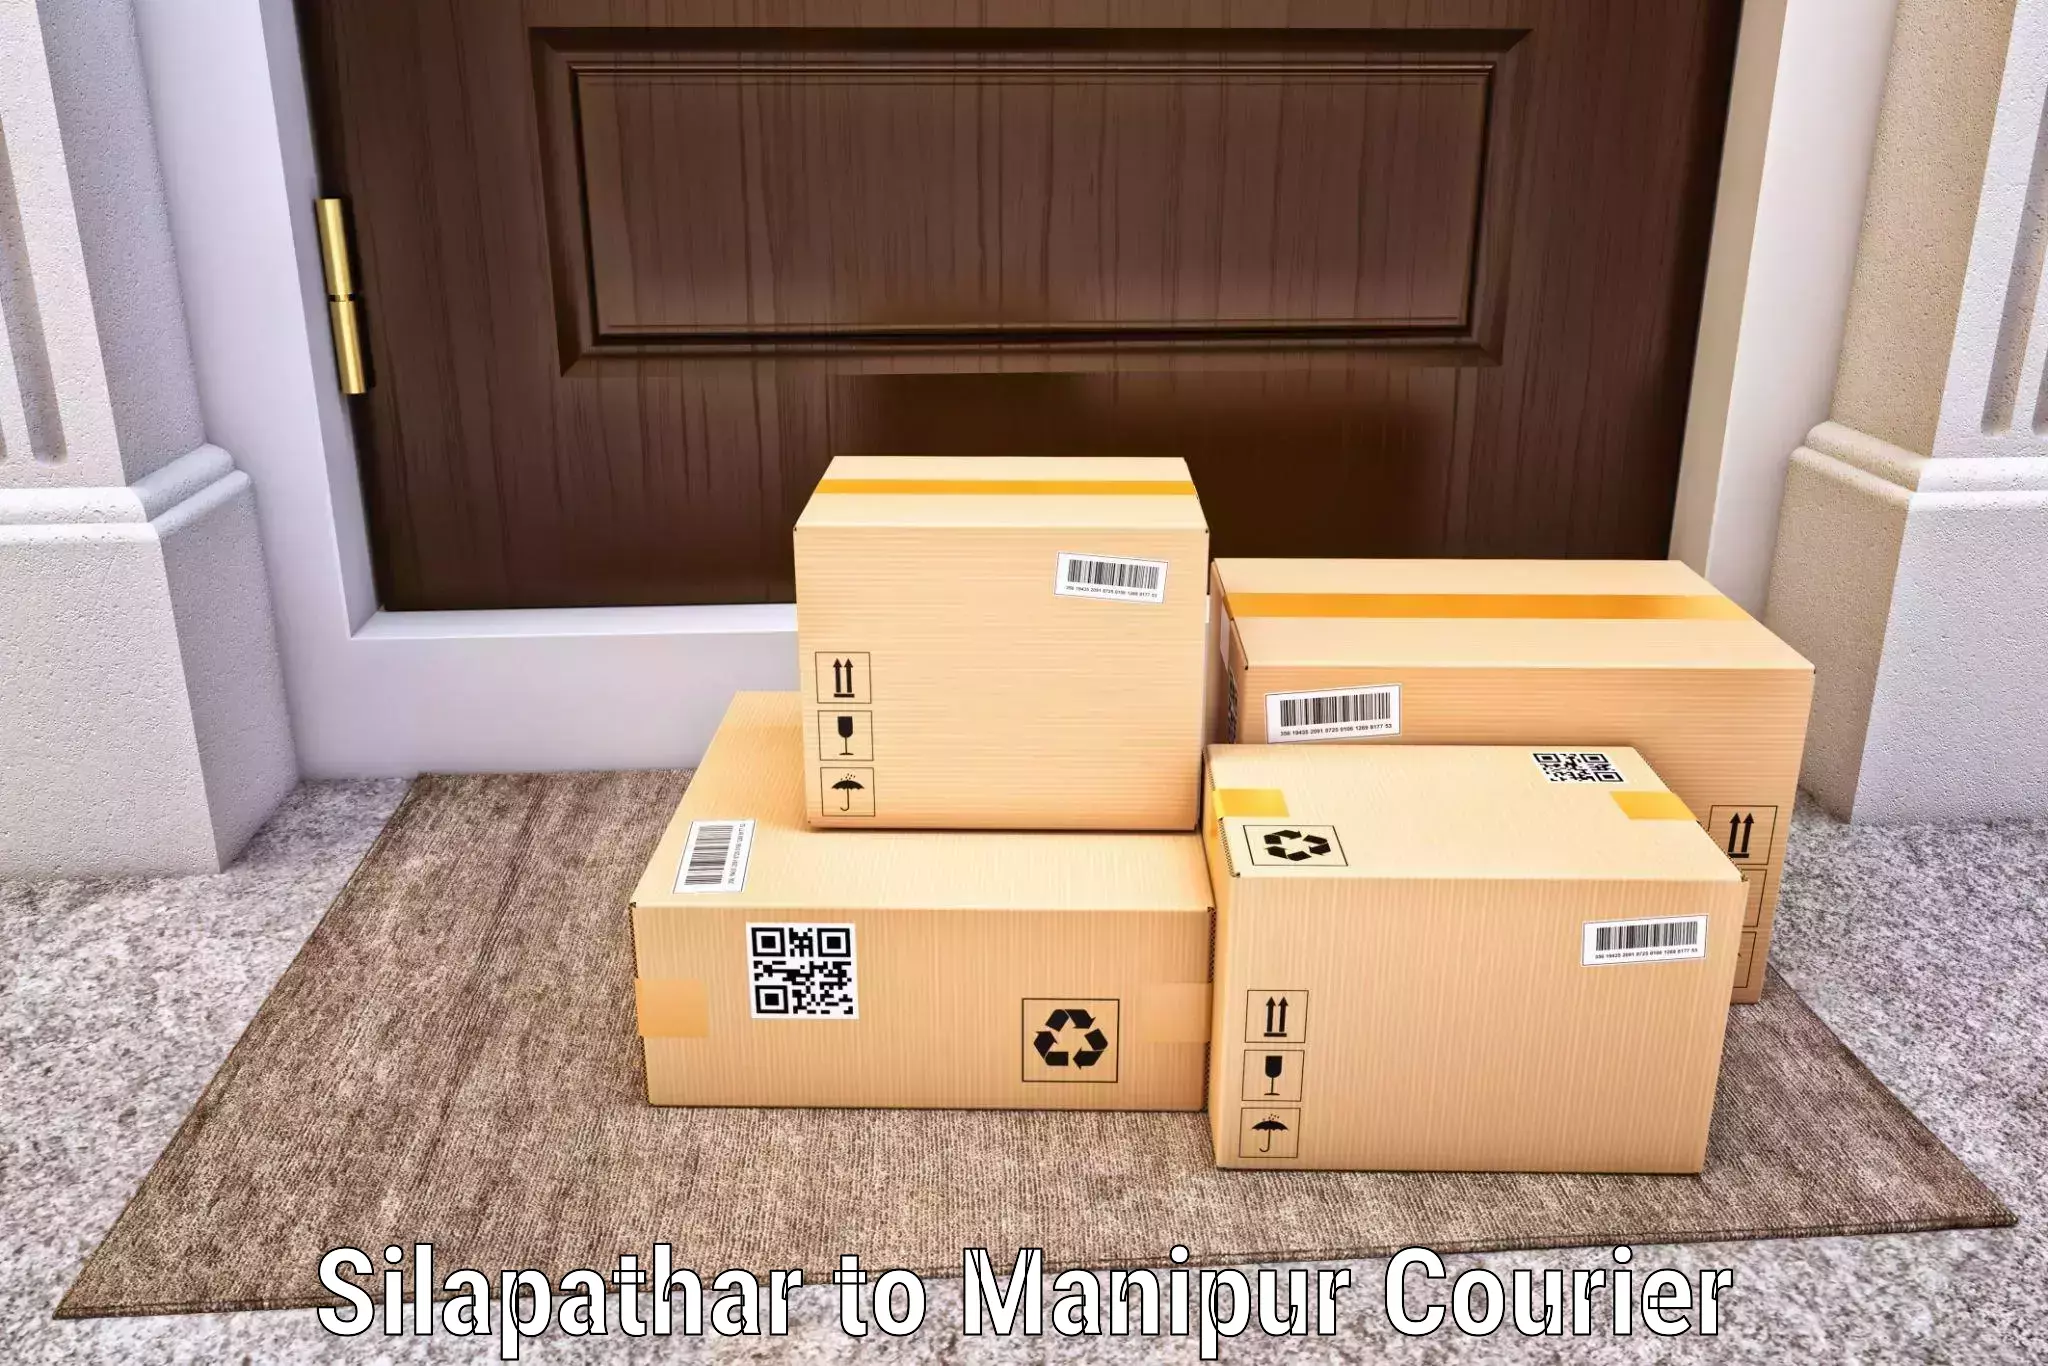 Nationwide shipping services Silapathar to Imphal